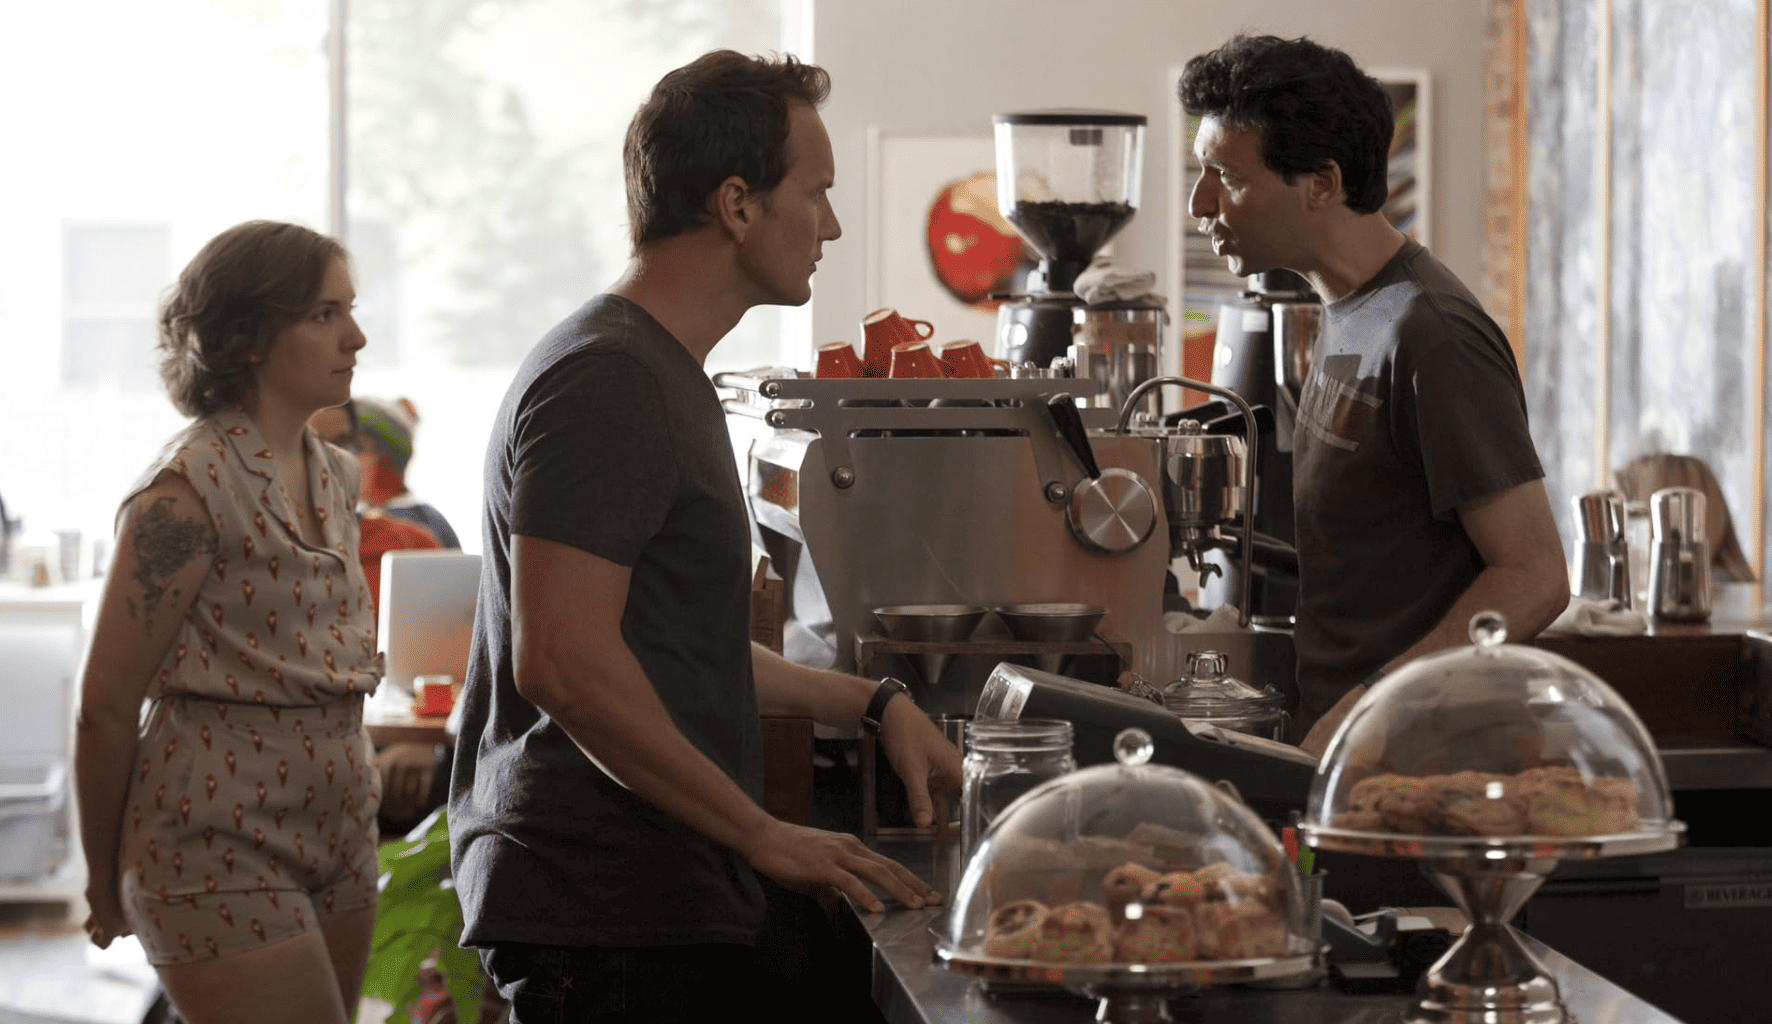 Patrick Wilson placing an order at a coffee shop in this image from Apatow Productions